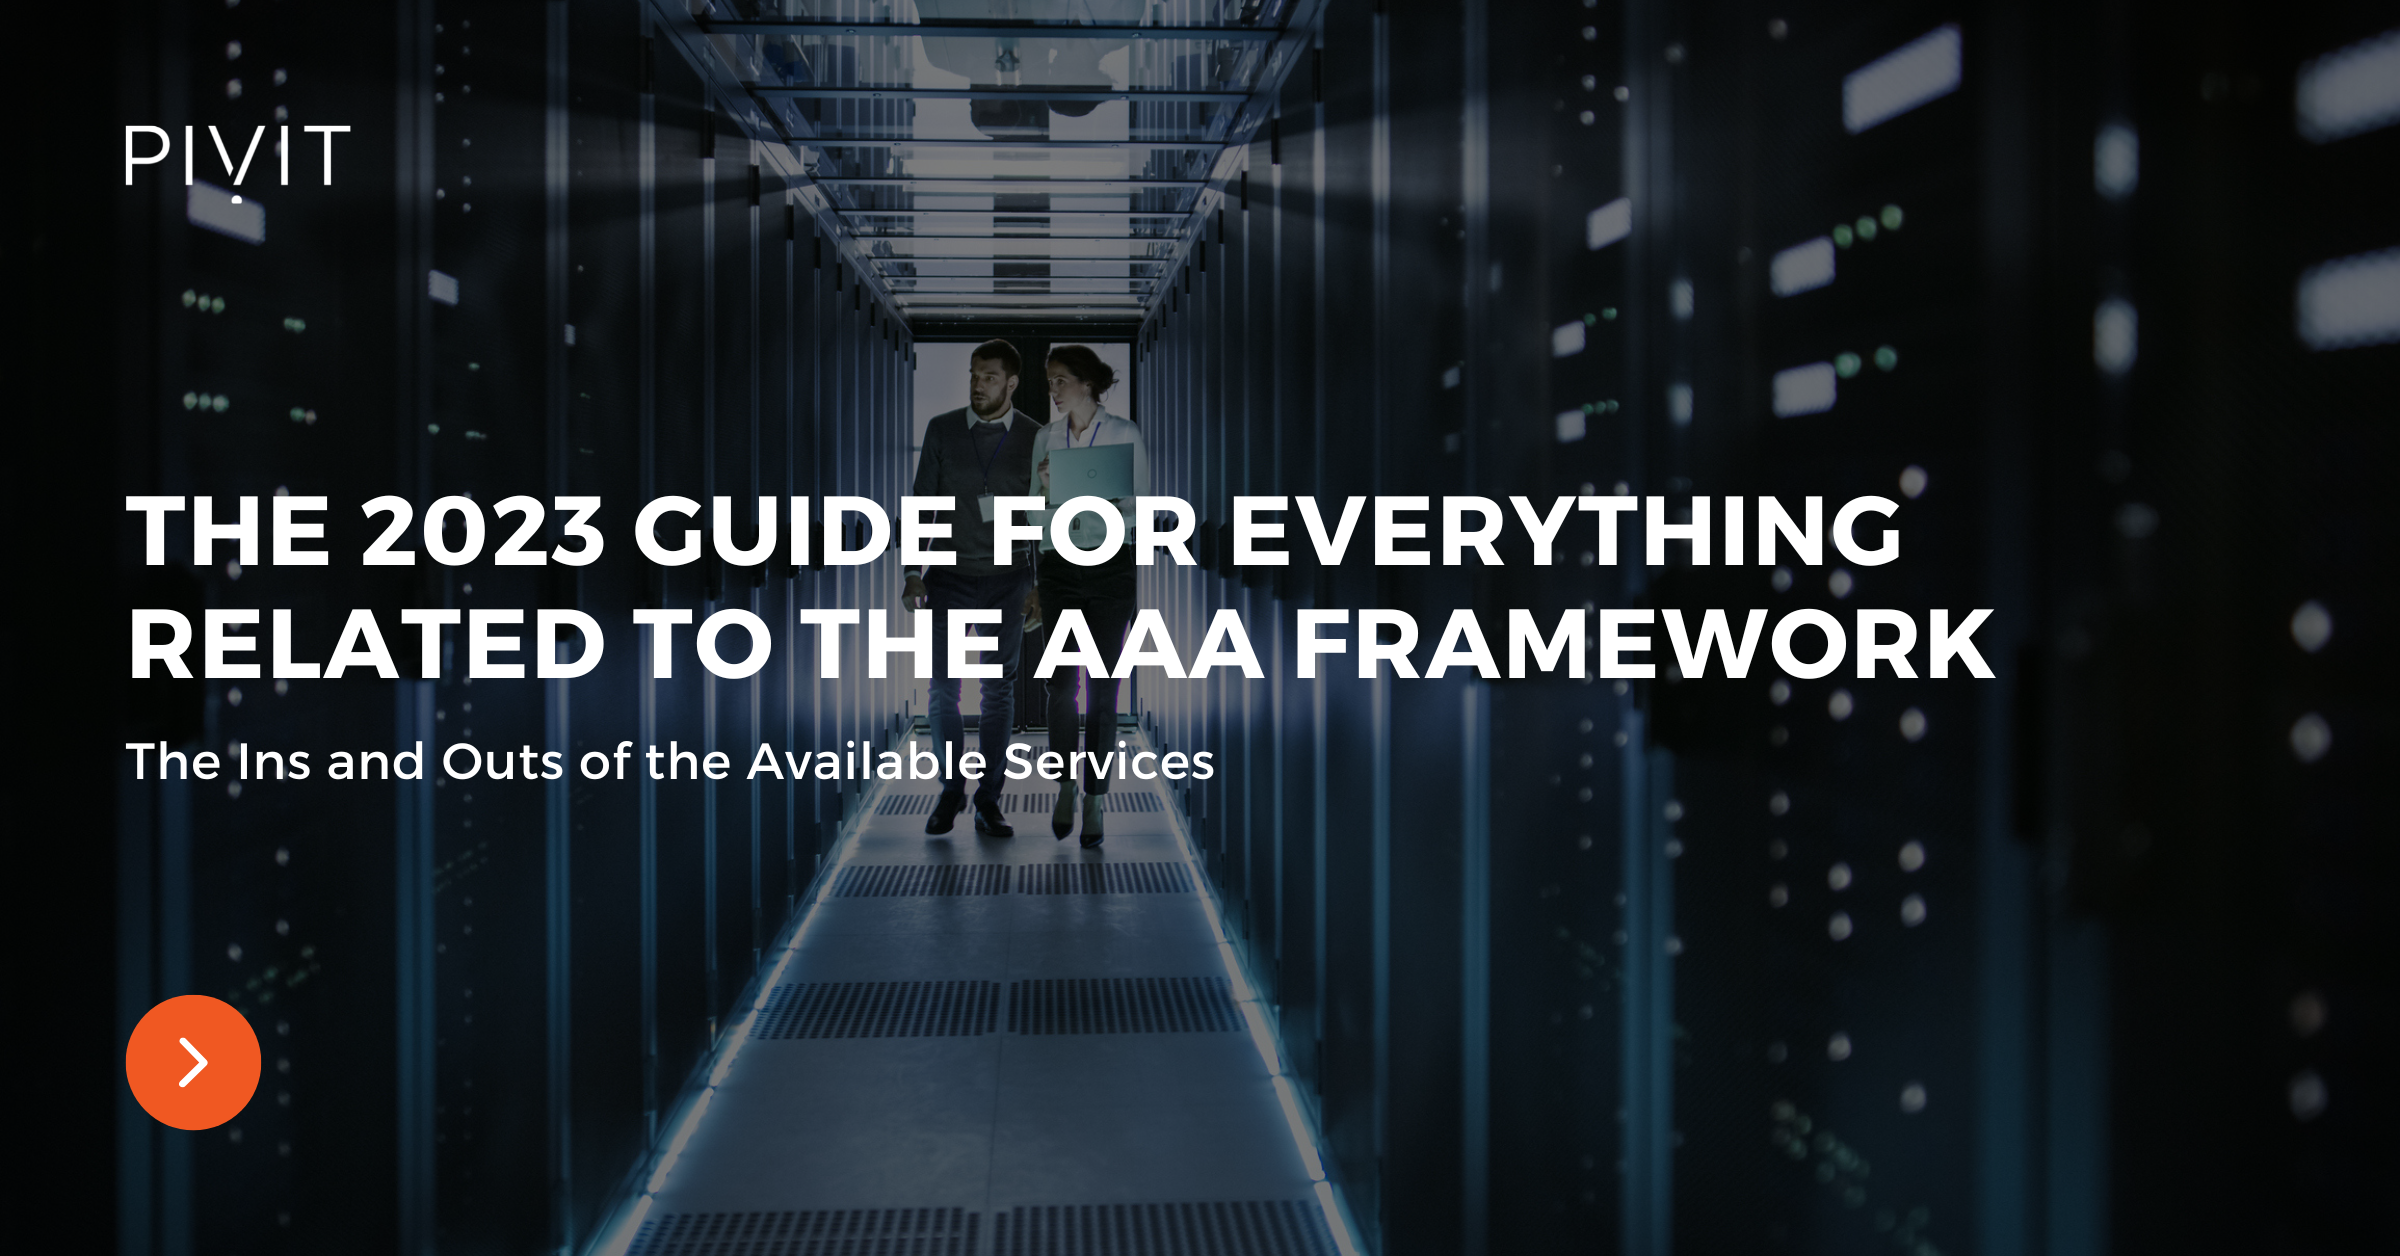 The 2023 Guide for Everything Related to the AAA Framework - The 2023 Guide for Everything Related to the AAA Framework